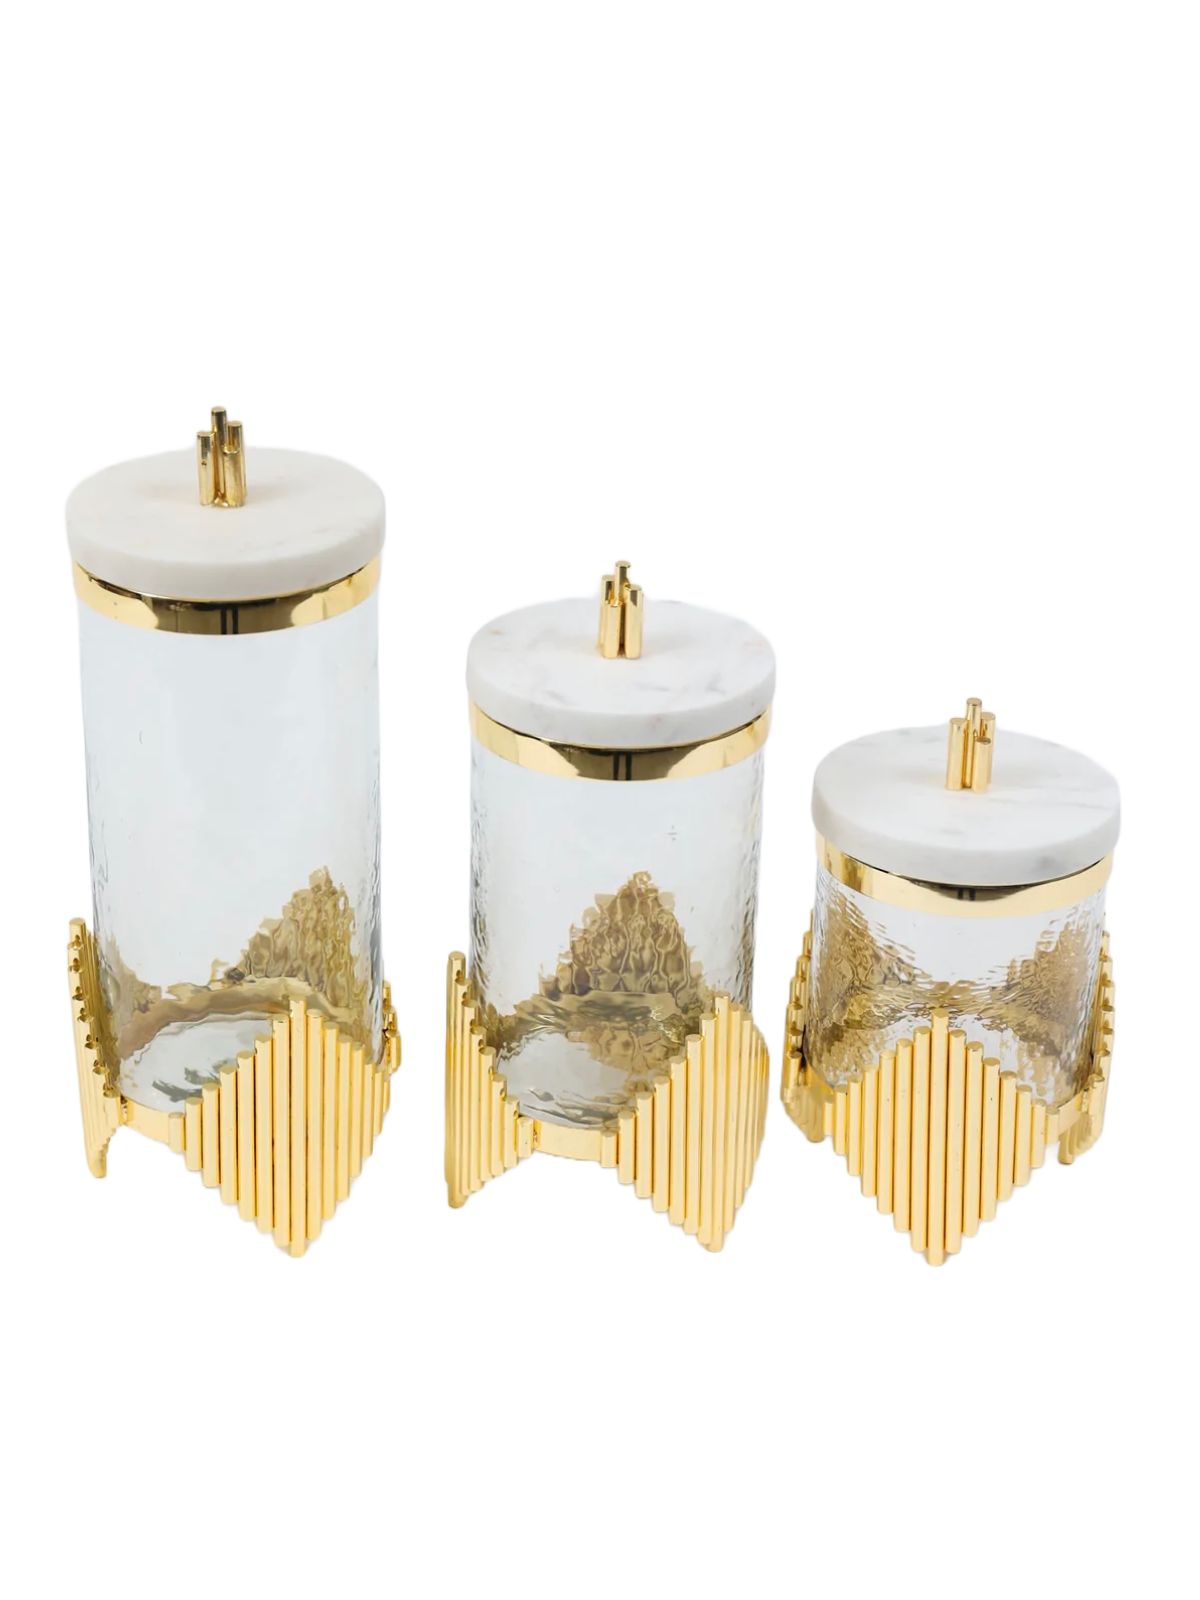 Luxurious glass canisters with gold metal diamond shaped base and marble lid. Available in 3 sizes and sold by KYA Home Decor